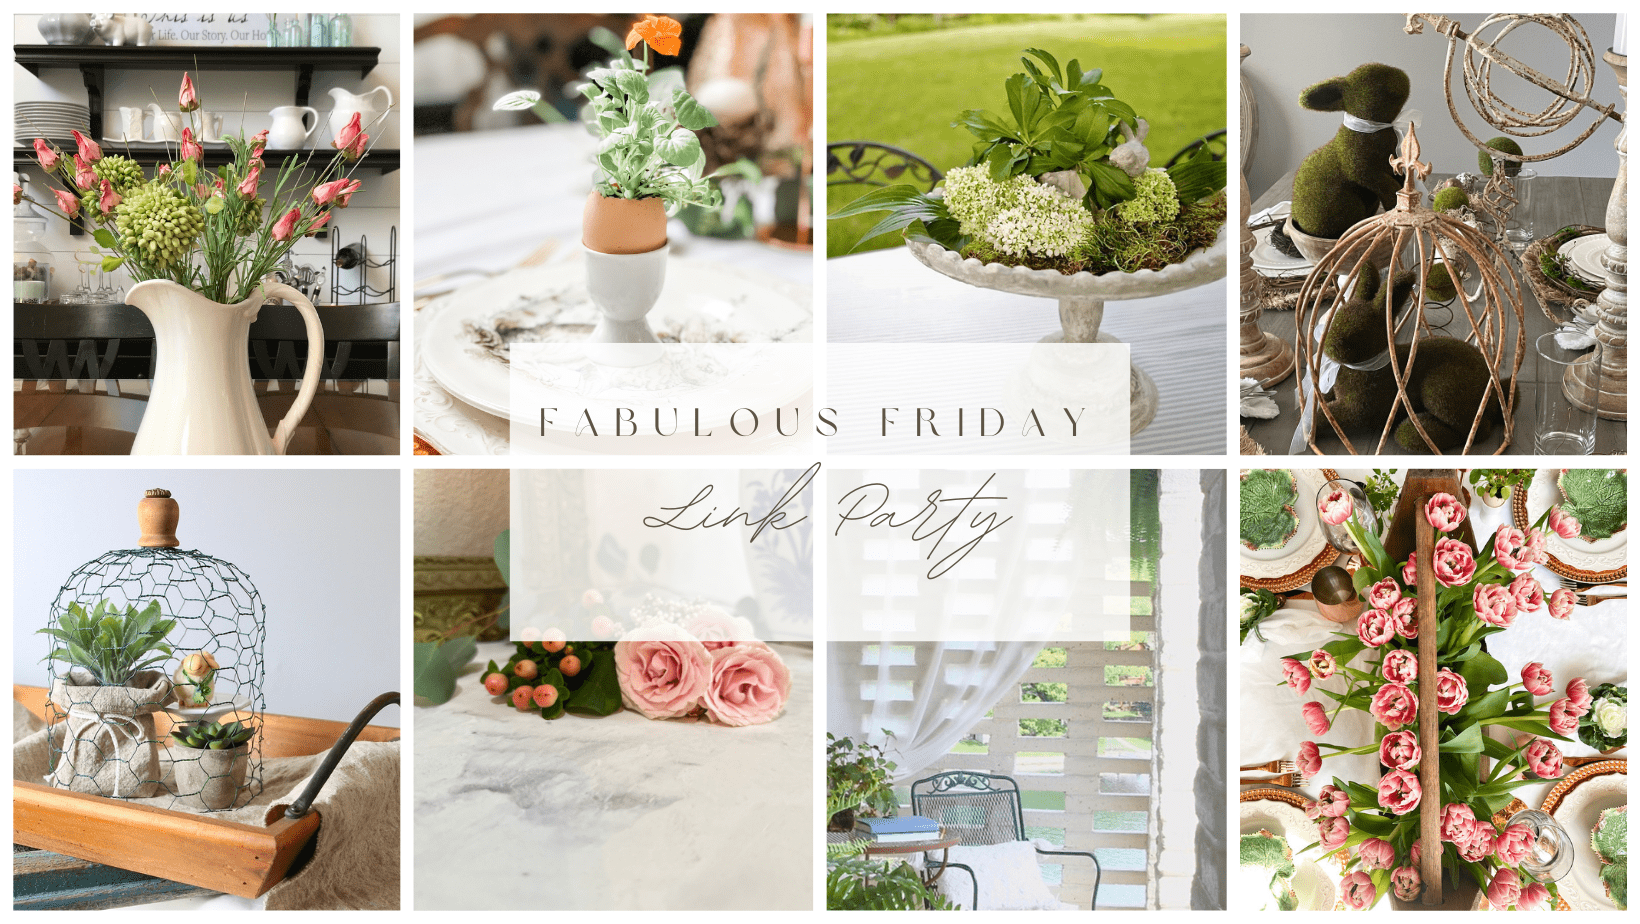 Fabulous Friday Link Party 3.17.23